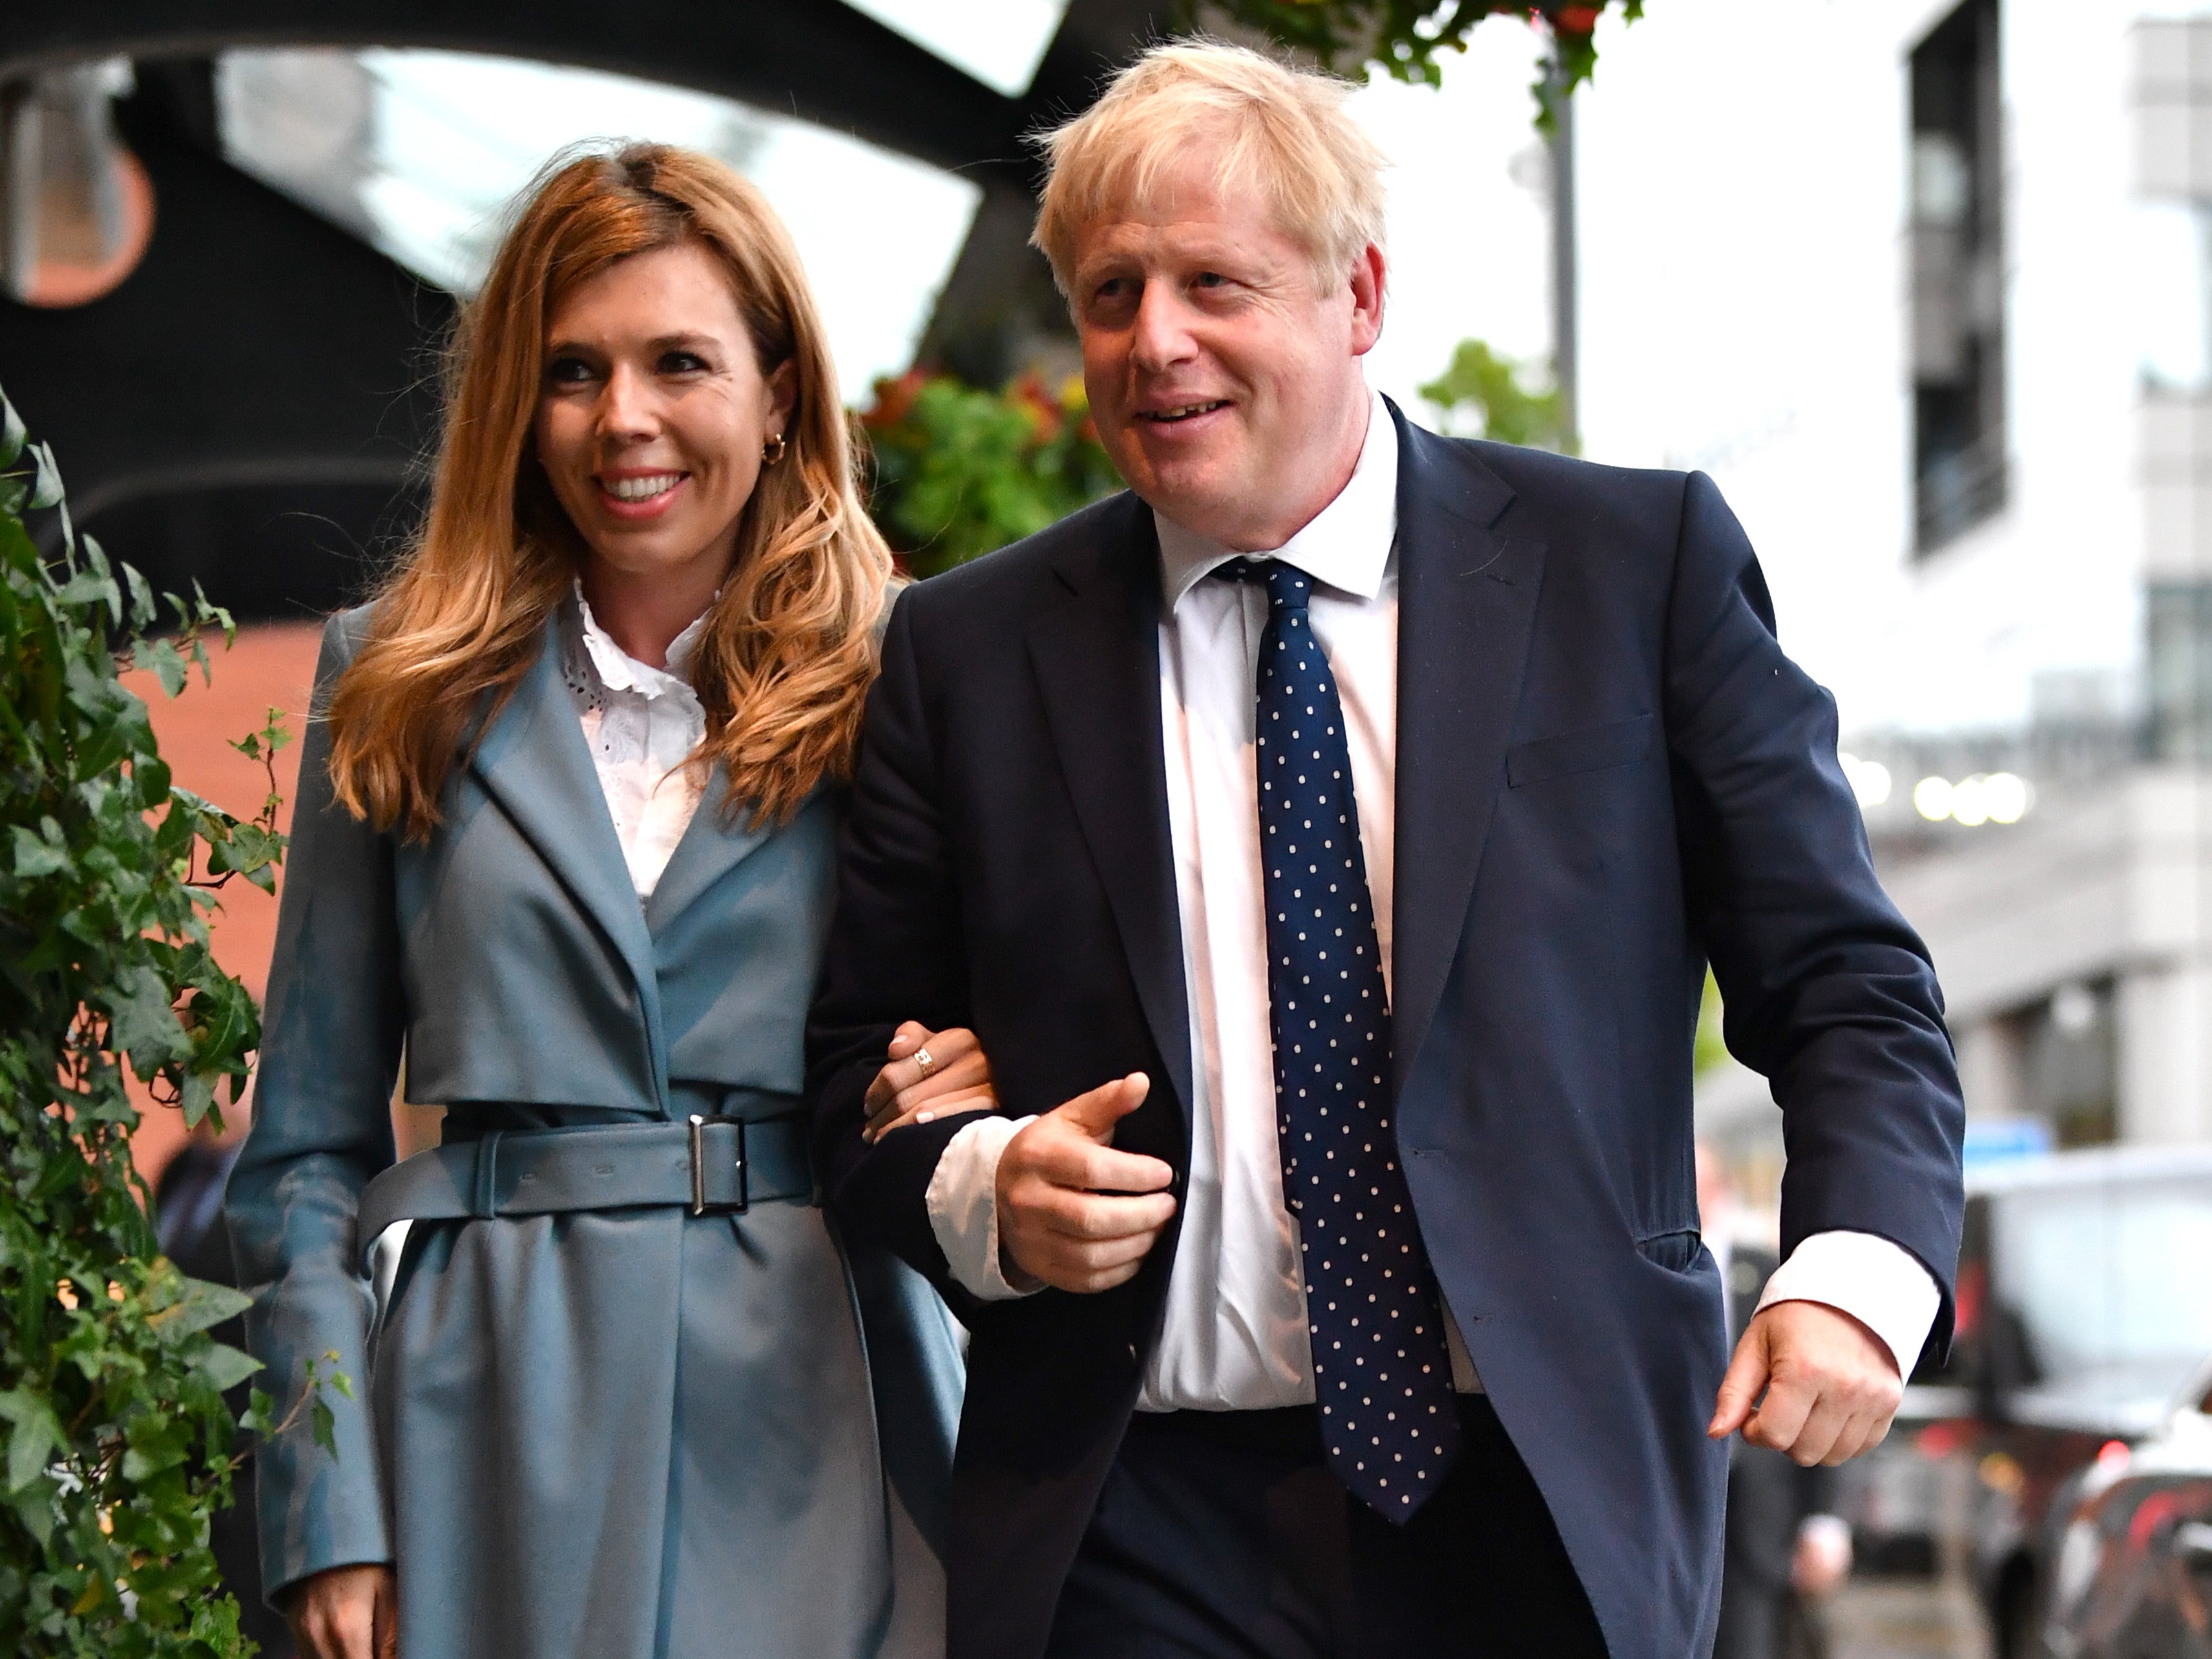 Boris Johnson, right, with his wife Carrie Johnson